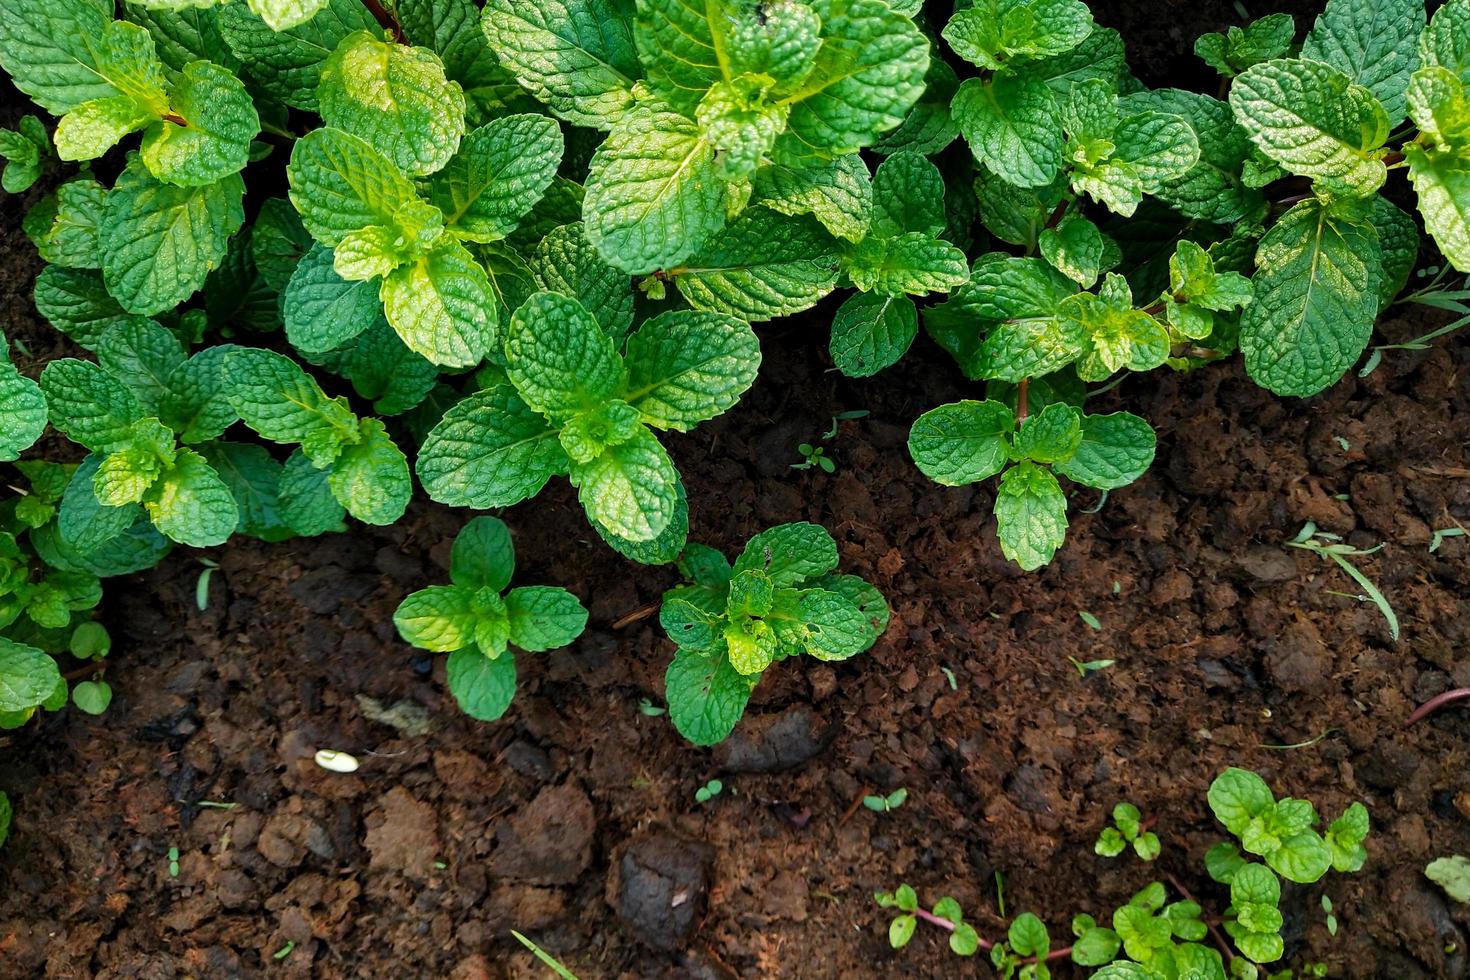 Mint plants on the ground photo